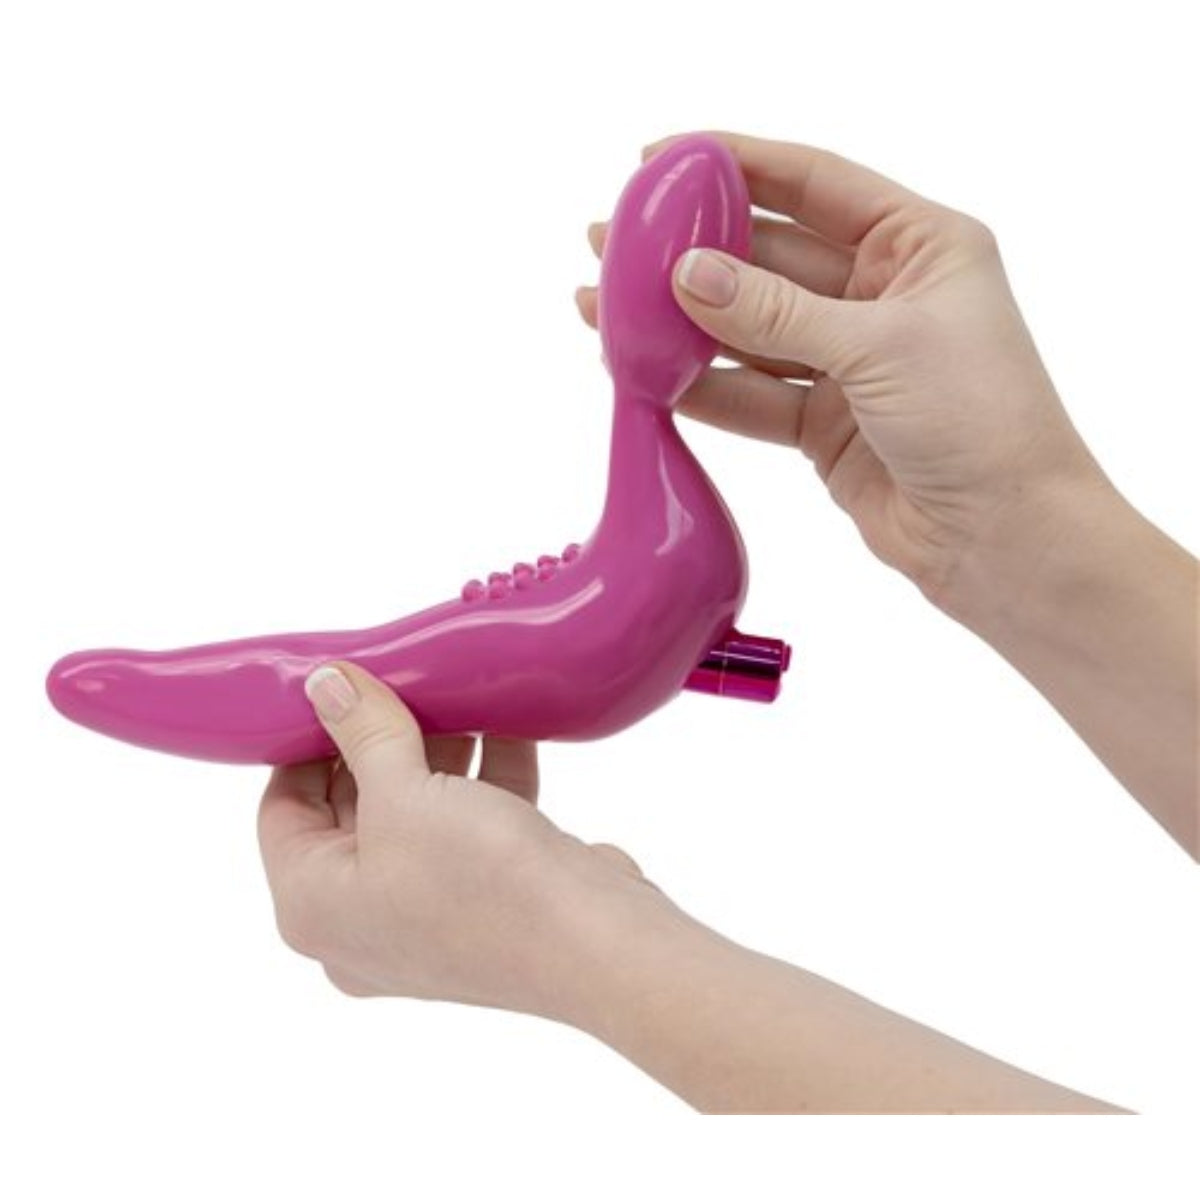 BMS Factory Infinity Rechargeable Strapless Strap-On Silicone Pink 4.75 Inch - Simply Pleasure